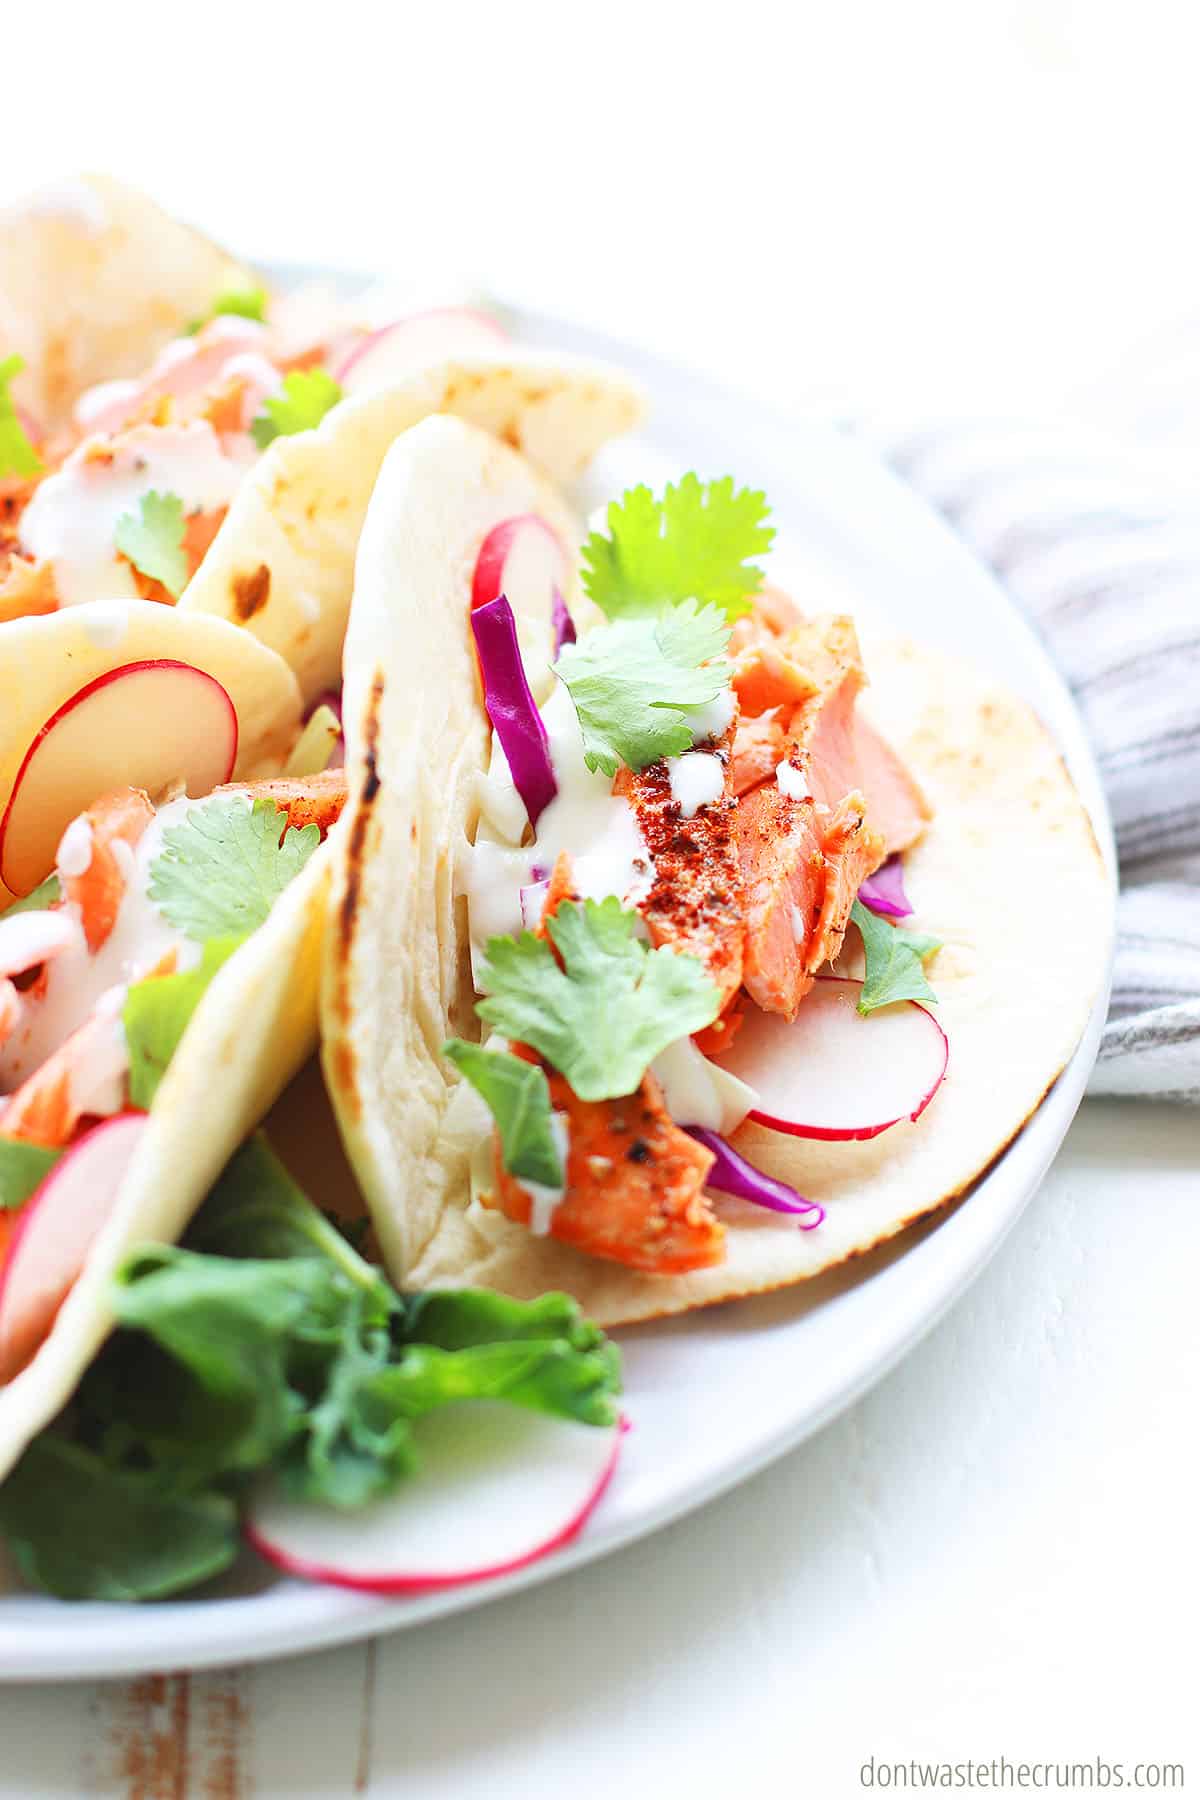 Upclose view of spicy salmon tacos on a white plate.